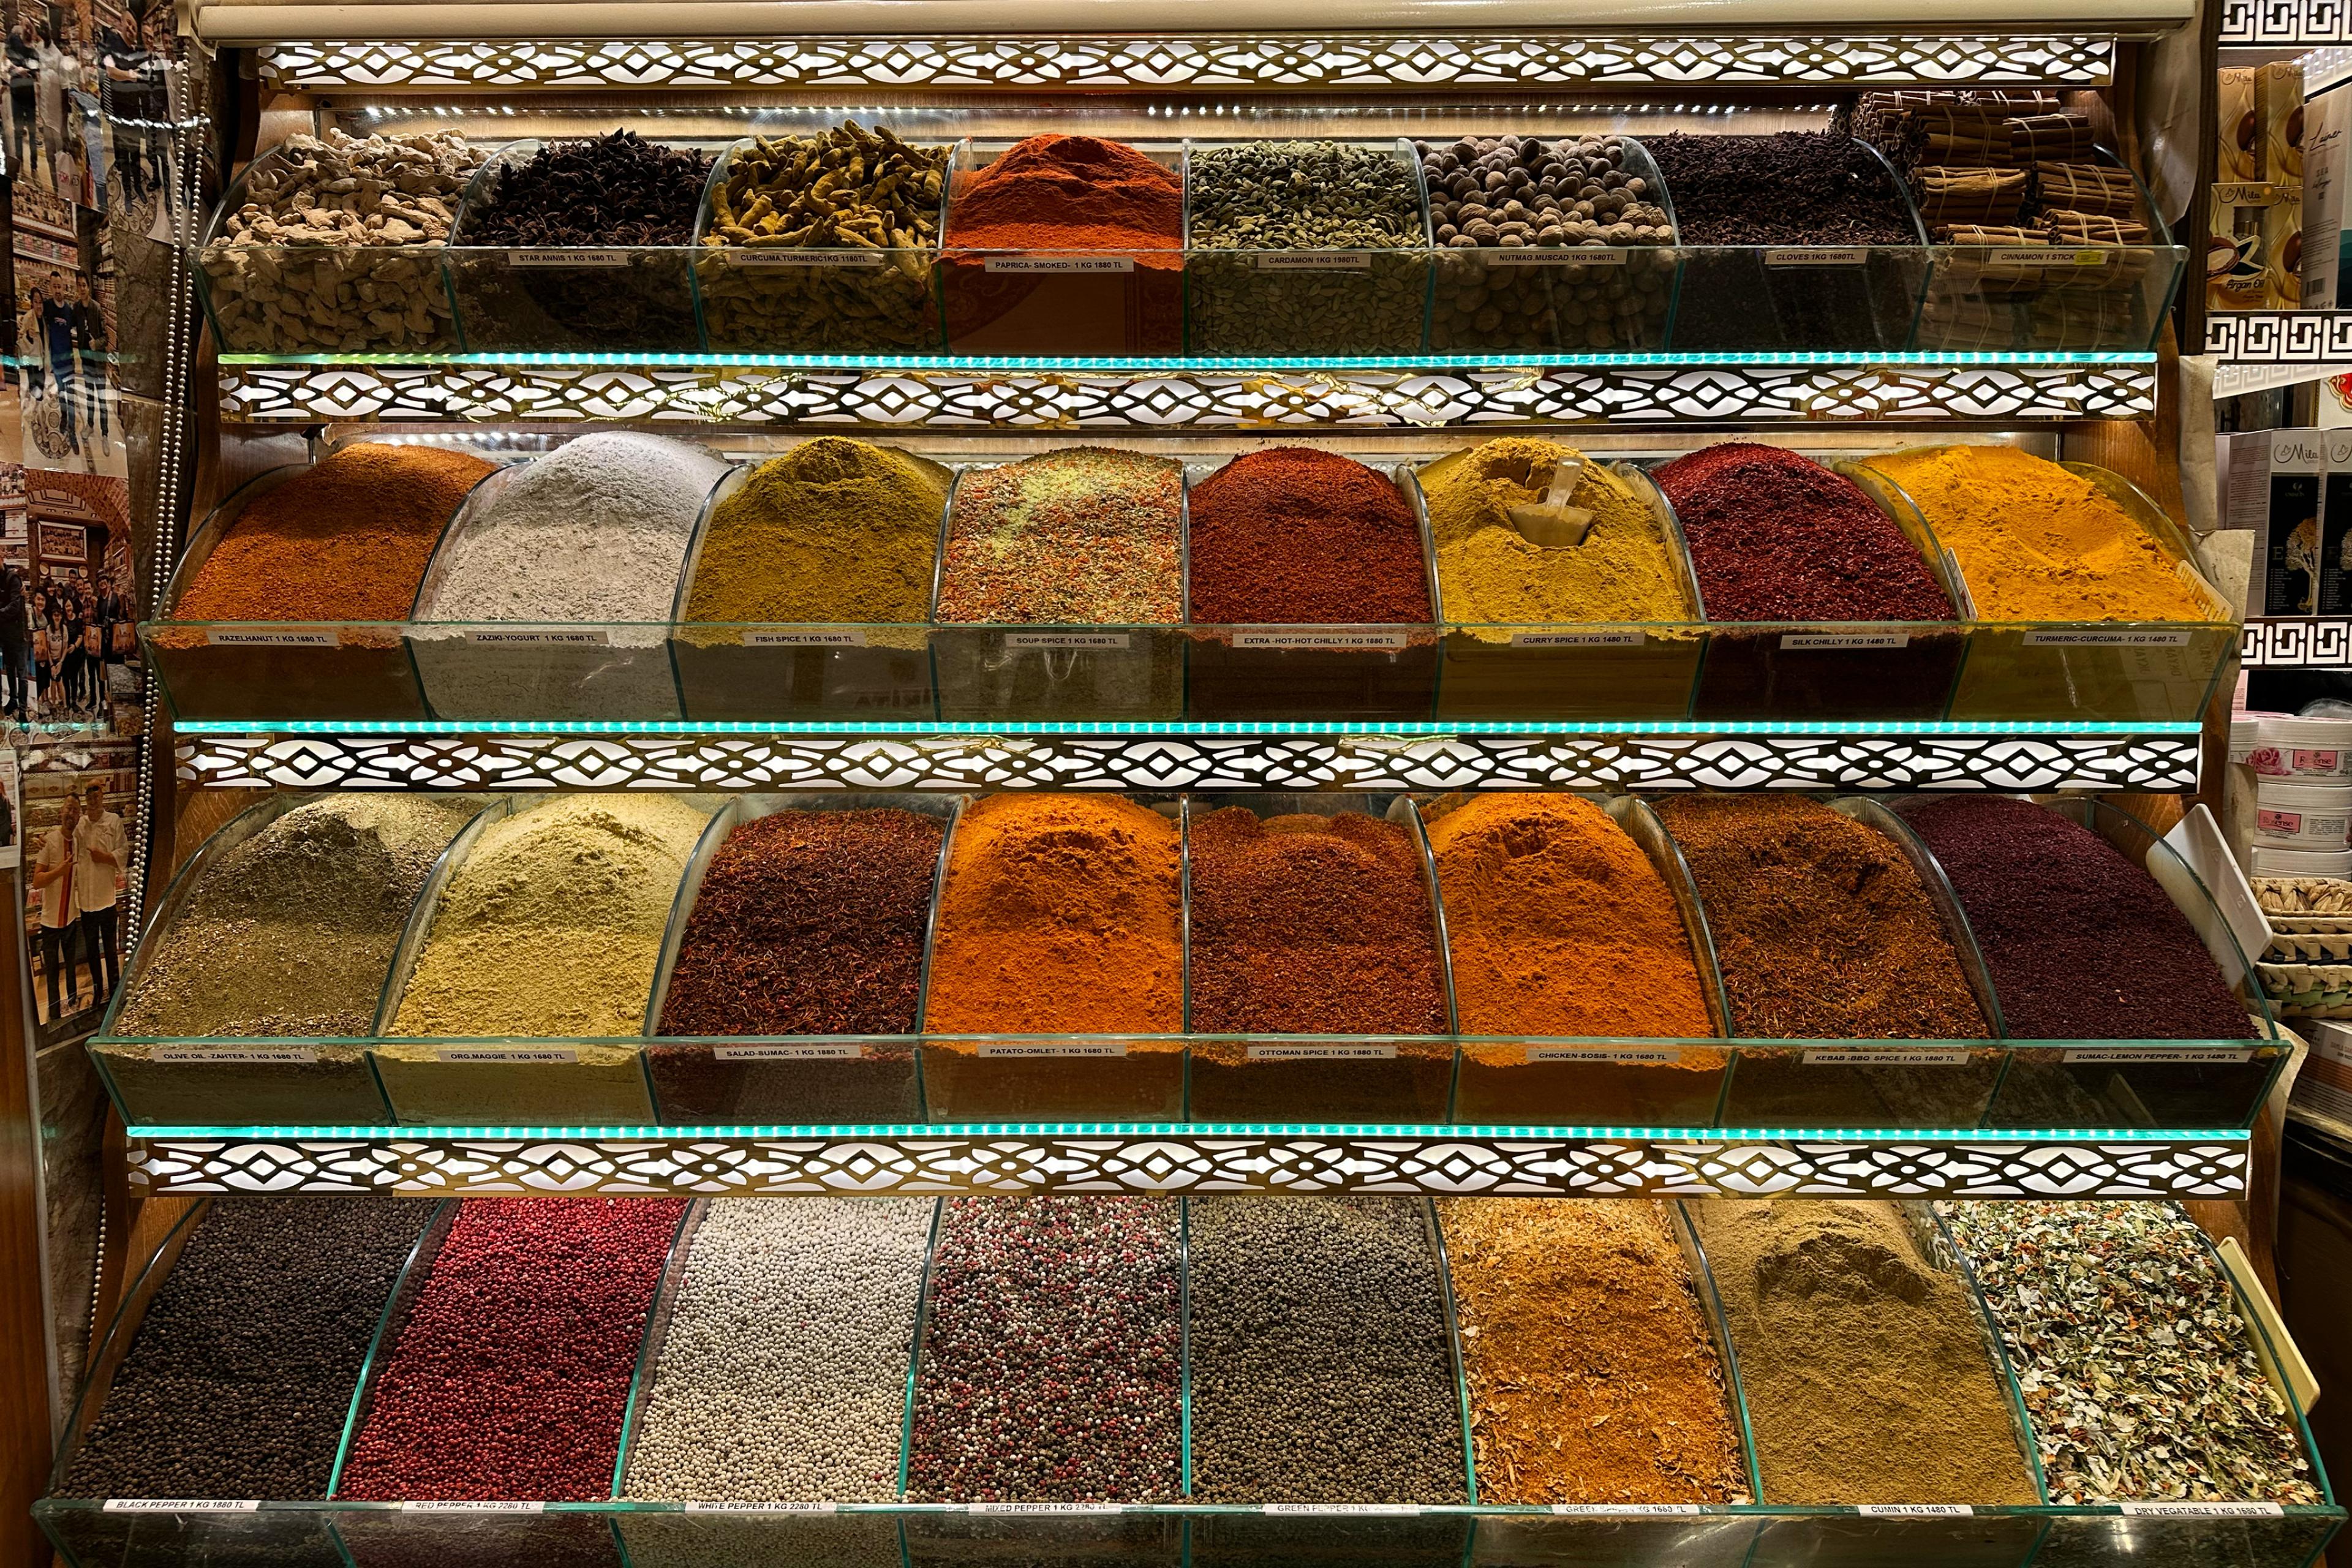 shelves of colorful spices